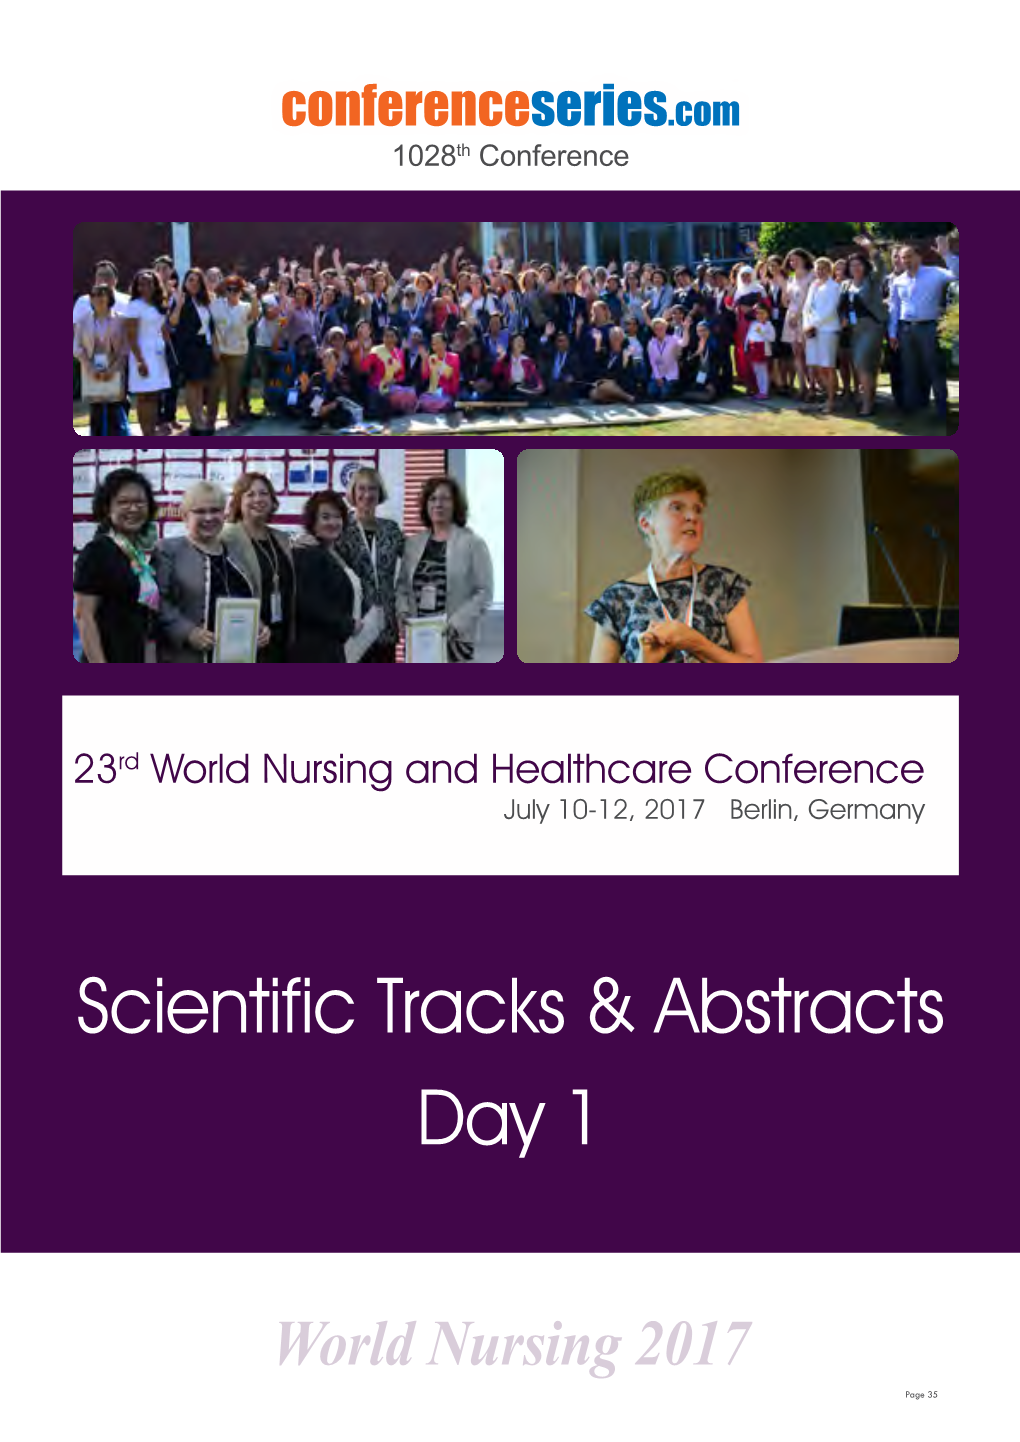 World Nursing 2017 Page 35 Sessions Day 1 July 10, 2017 Nursing Education & Practice